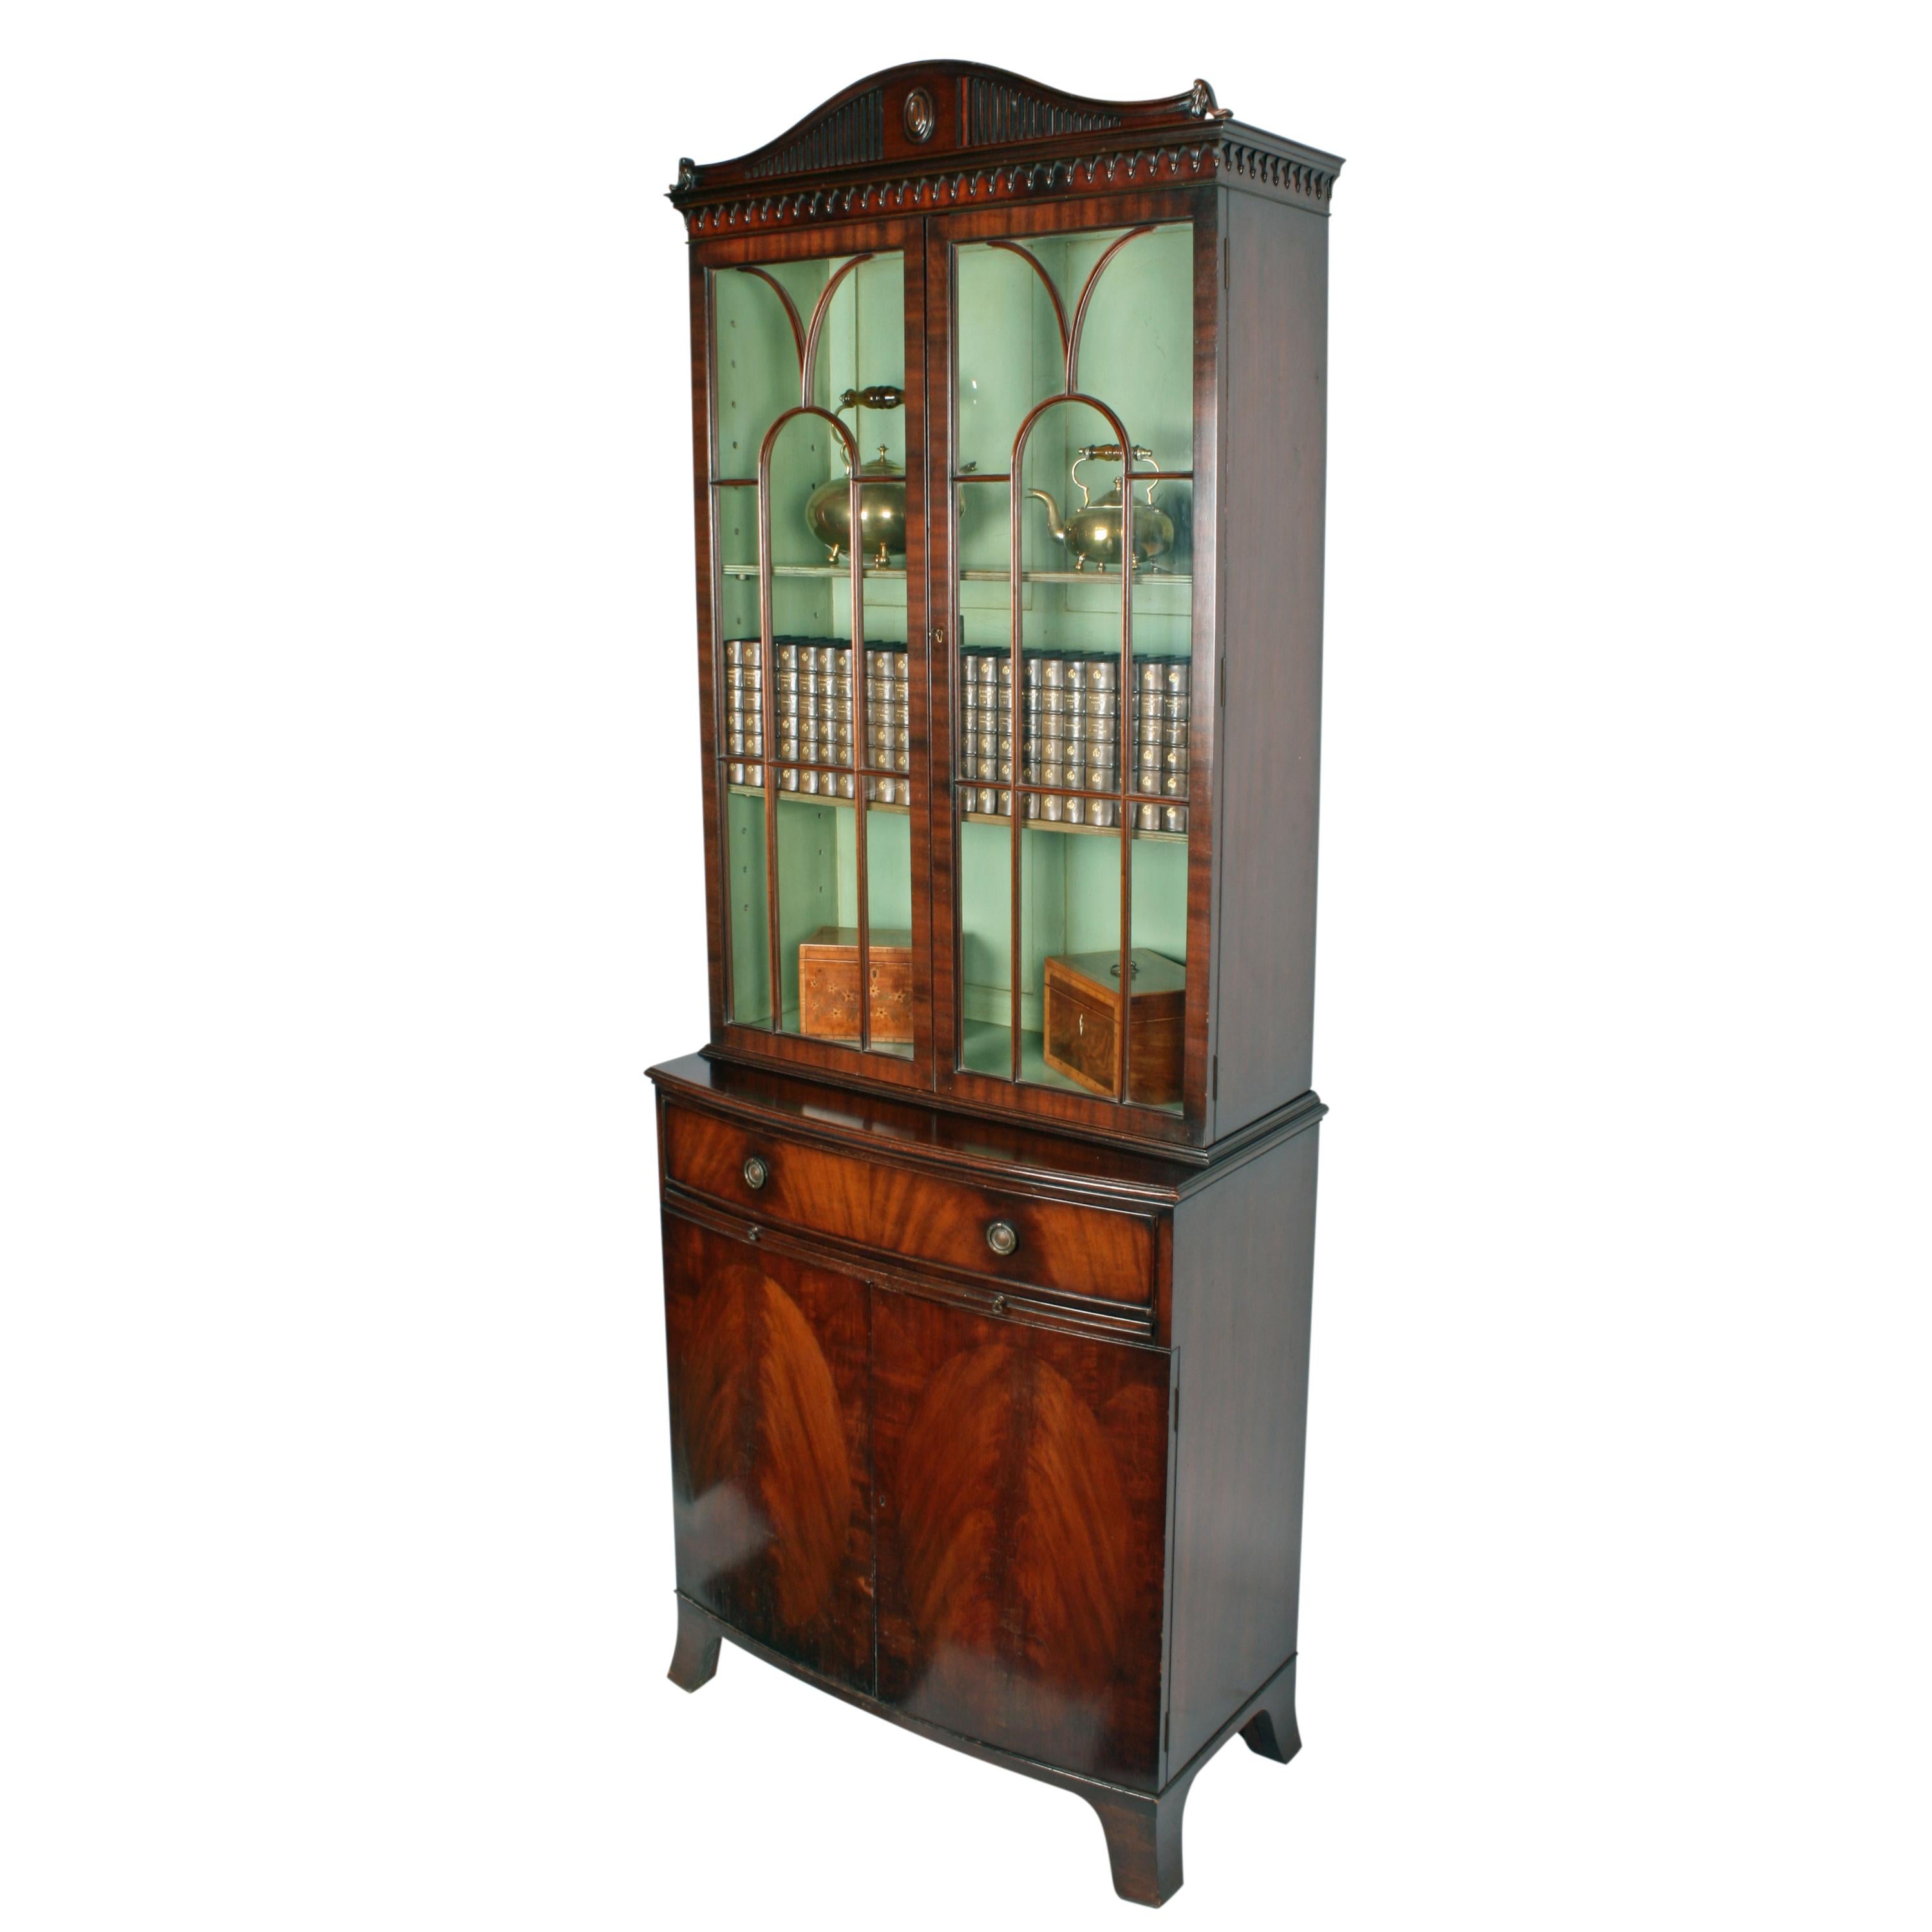 Hepplewhite style two-door bookcase


An early 20th century mahogany Hepplewhite style bookcase.

The bookcase has a two door glazed top over a two door cupboard base with a drawer and slide.

The bookcase top has a decorative serpentine